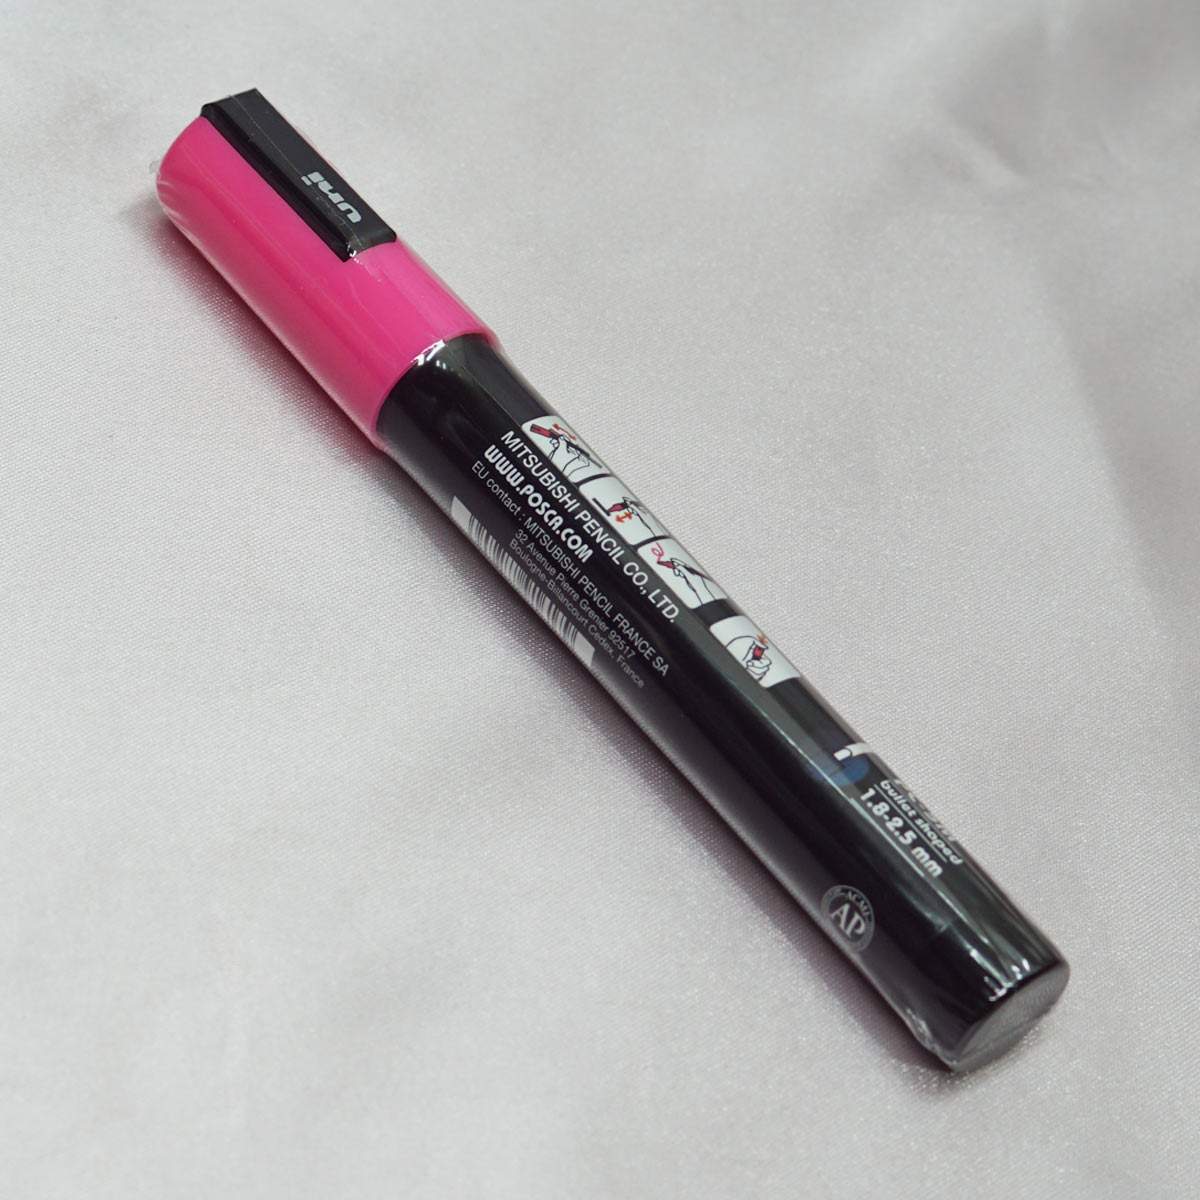 Uniball Posca PC-5M Bullet Medium Tip 1.8 - 2.5mm Opaque Pink Color and Water Based Paint Marker SKU 22475